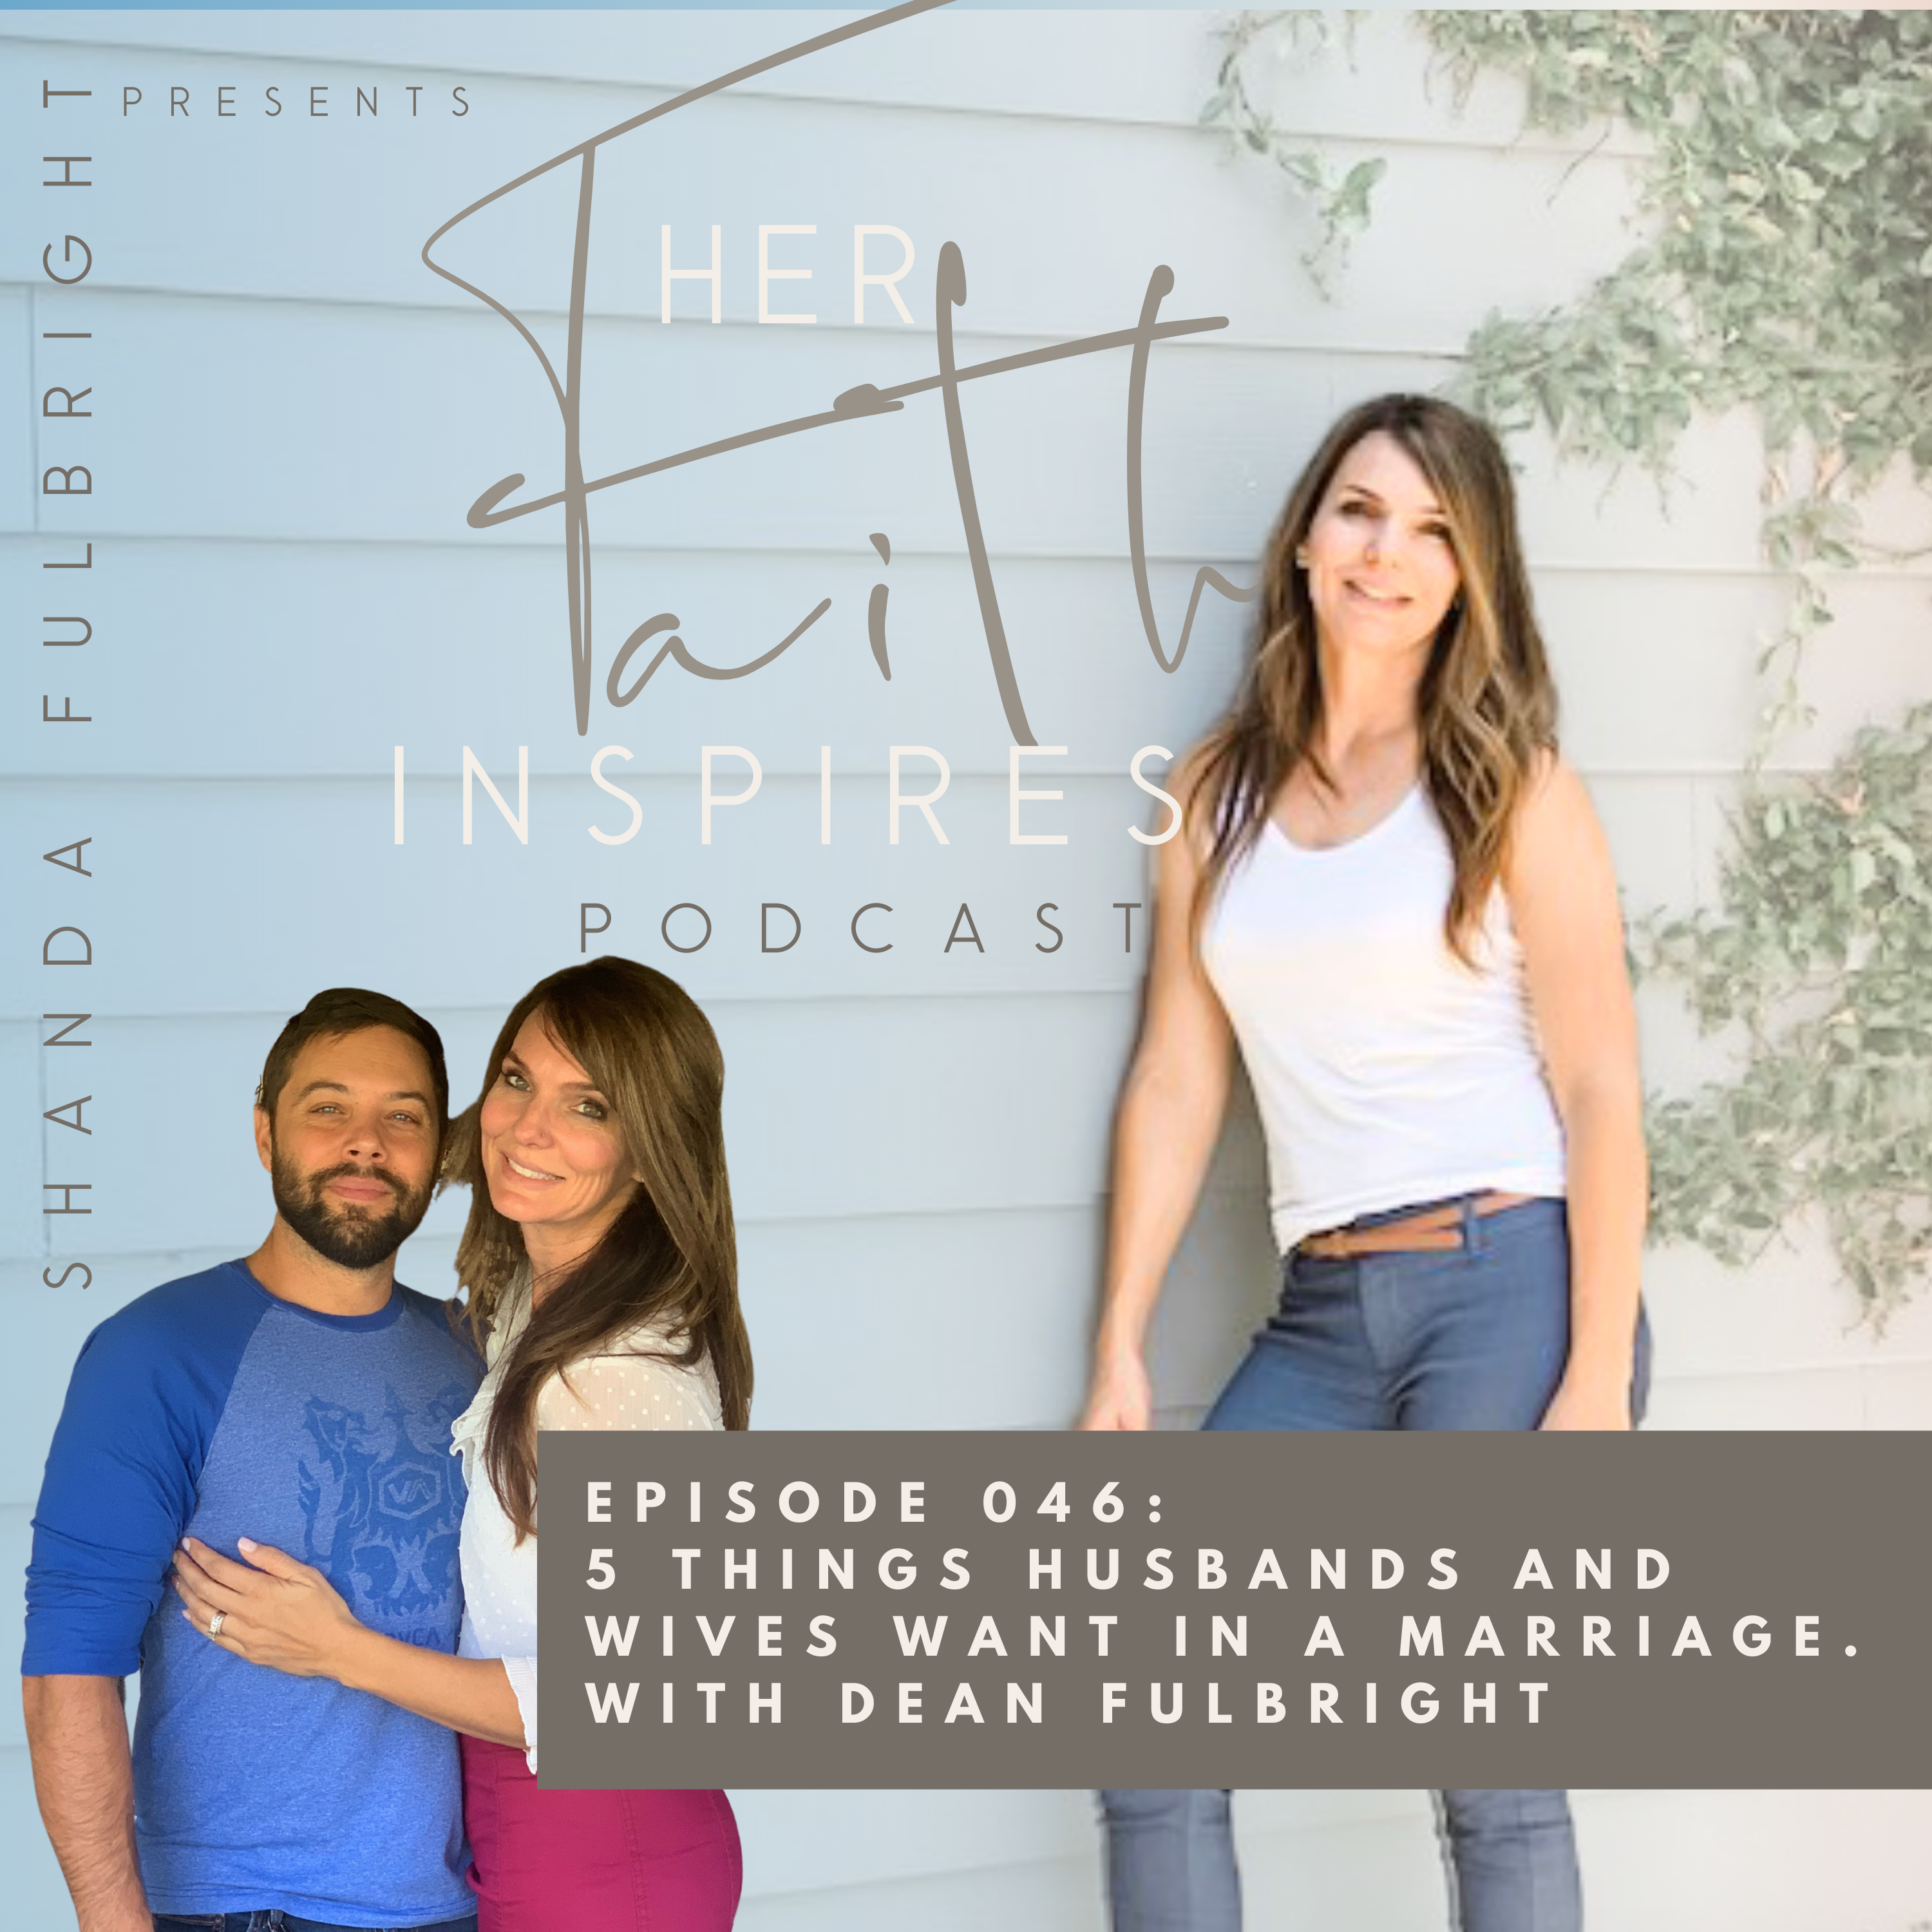 SF Podcast Episode 44 1 - HER FAITH INSPIRES 46 : 5 things husbands and wives want in a marriage.